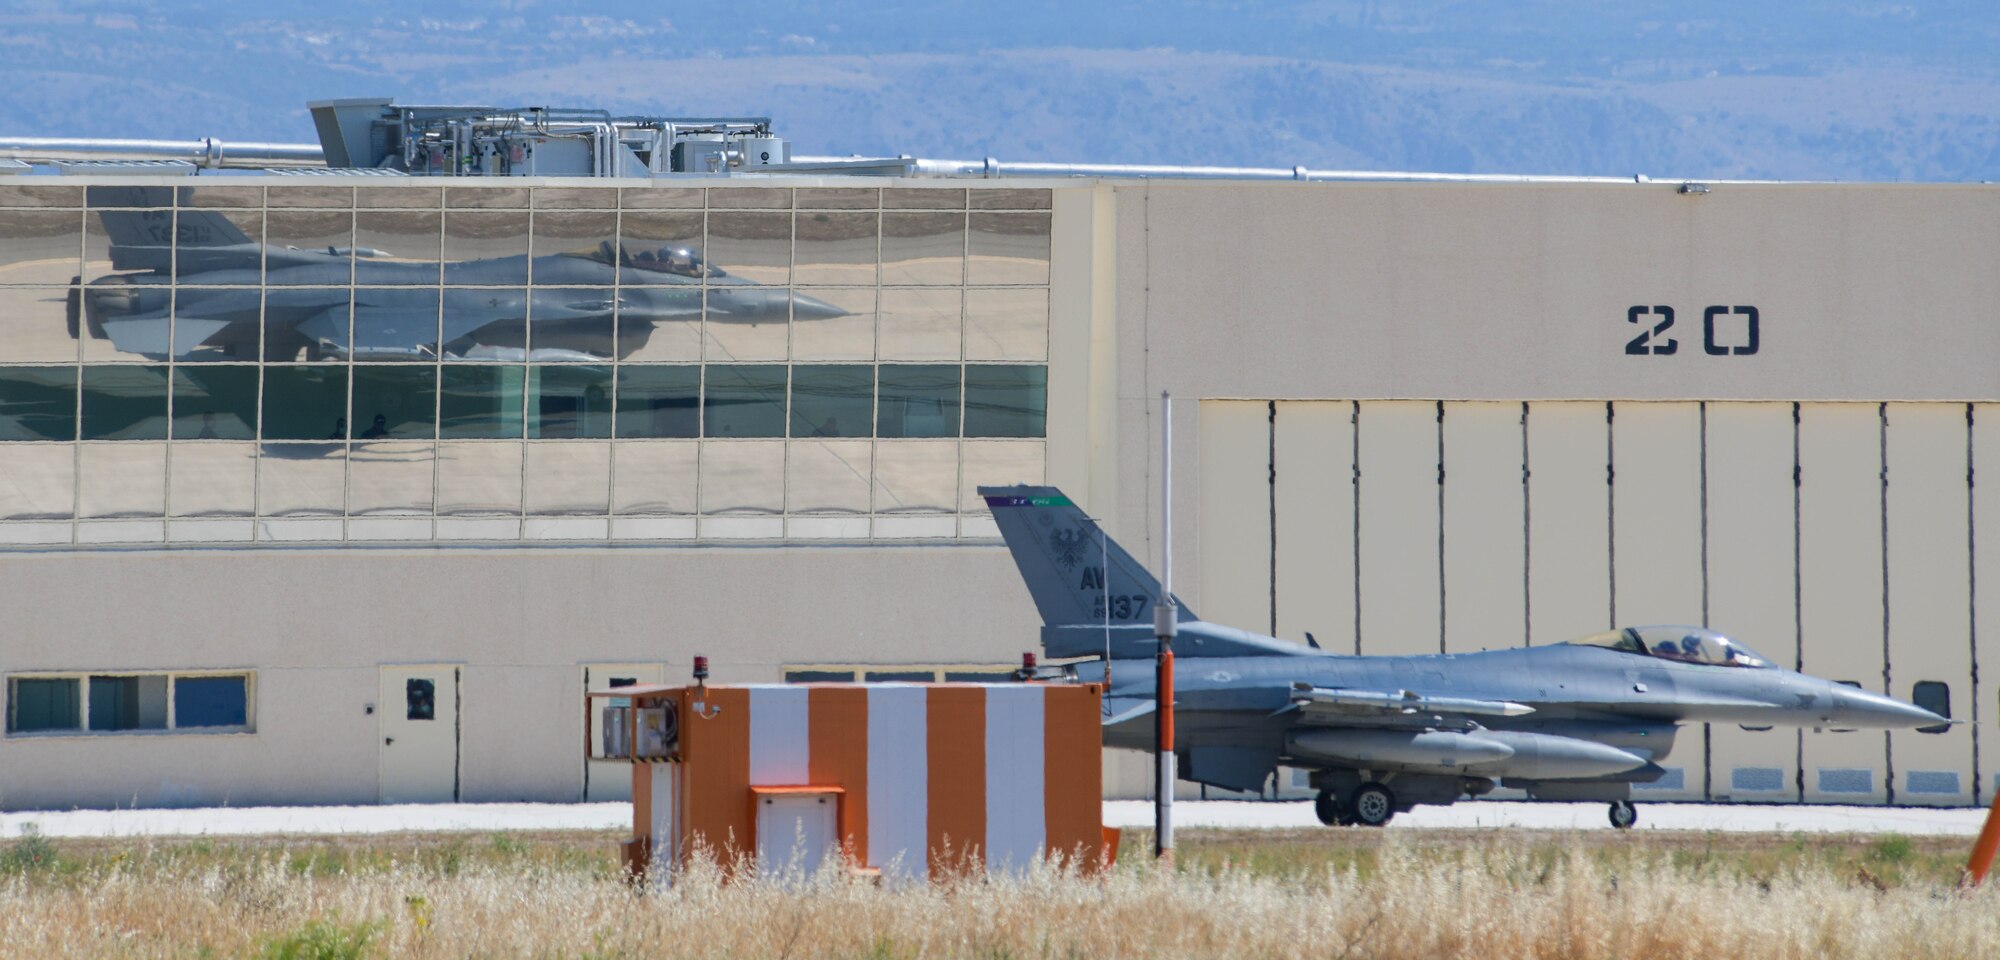 A U.S. Air Force F-16C Fighting Falcon assigned to the 555th Fighter Squadron participating in Falcon Strike 21 (FS21) taxis on the flight line at Amendola Air Base, Italy, June 4, 2021. FS21 is a joint, multinational exercise with participants from the United States working with service members from Israel, Italy, and the United Kingdom, that optimizes the integration between fourth and fifth generation aircraft, and increases the level of cooperation in the F-35 Lightning II logistics and expeditionary fields. The exercise provides participants the opportunity to test and improve shared technical and tactical knowledge while conducting complex air operations in a contested multinational joint forces environment. (U.S. Air Force photo by Airman 1st Class Brooke Moeder)